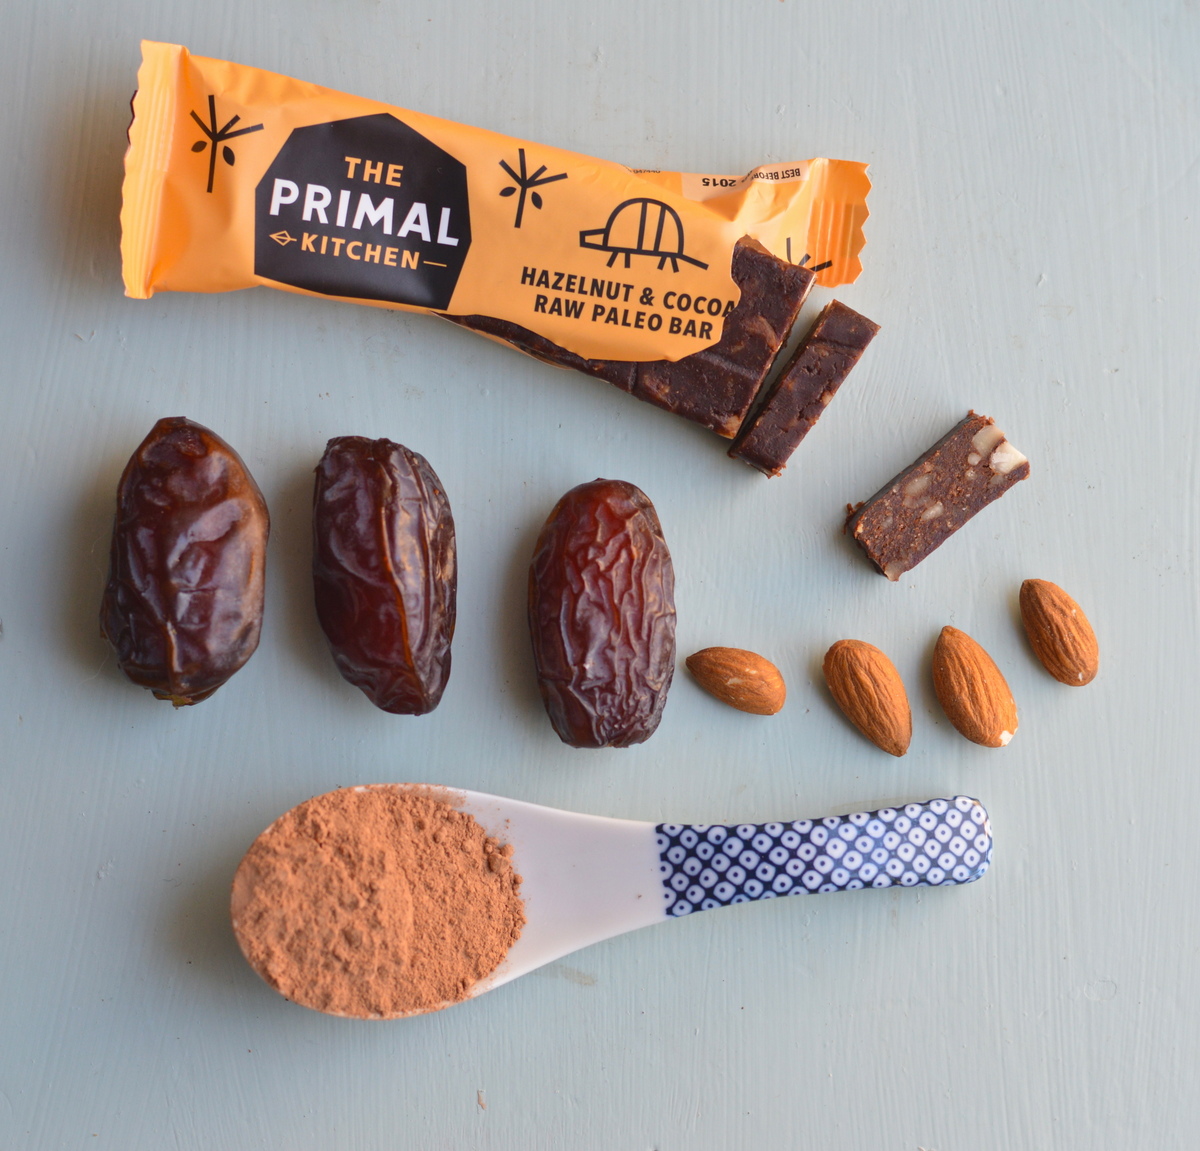 A Review Of The Primal Pantry Bars